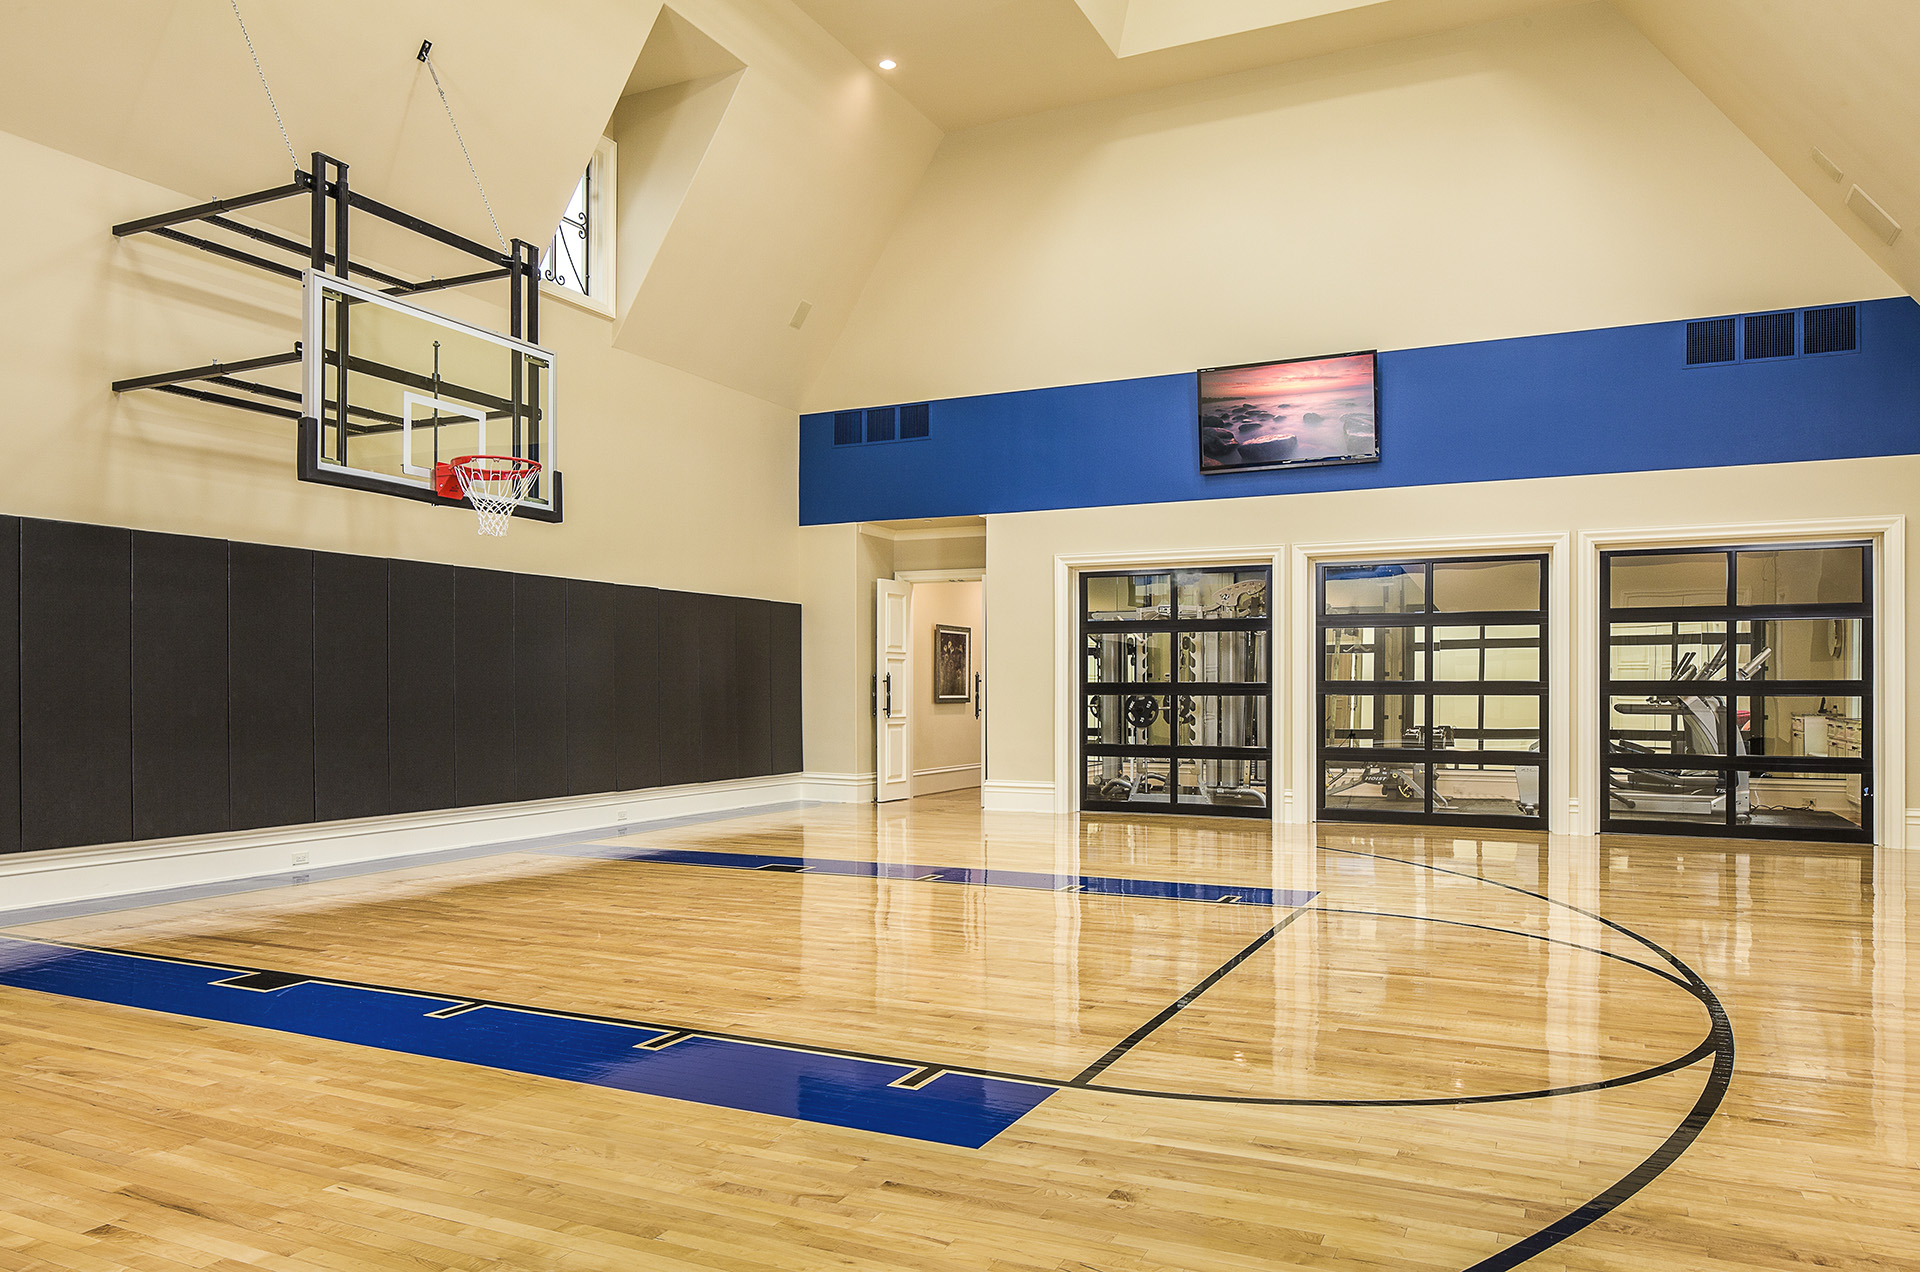 What You Need To Know Before Building A Basketball Court? | Top Article Submission Directory